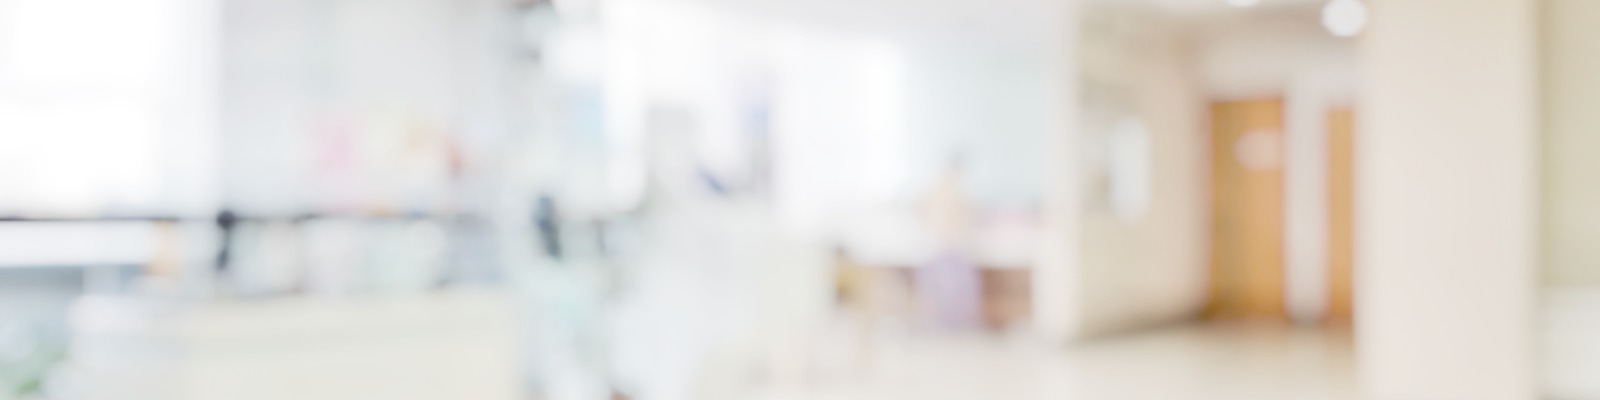 blur-abstract-background-of-corridor-in-clean-hospital-blurred-view-1400x500